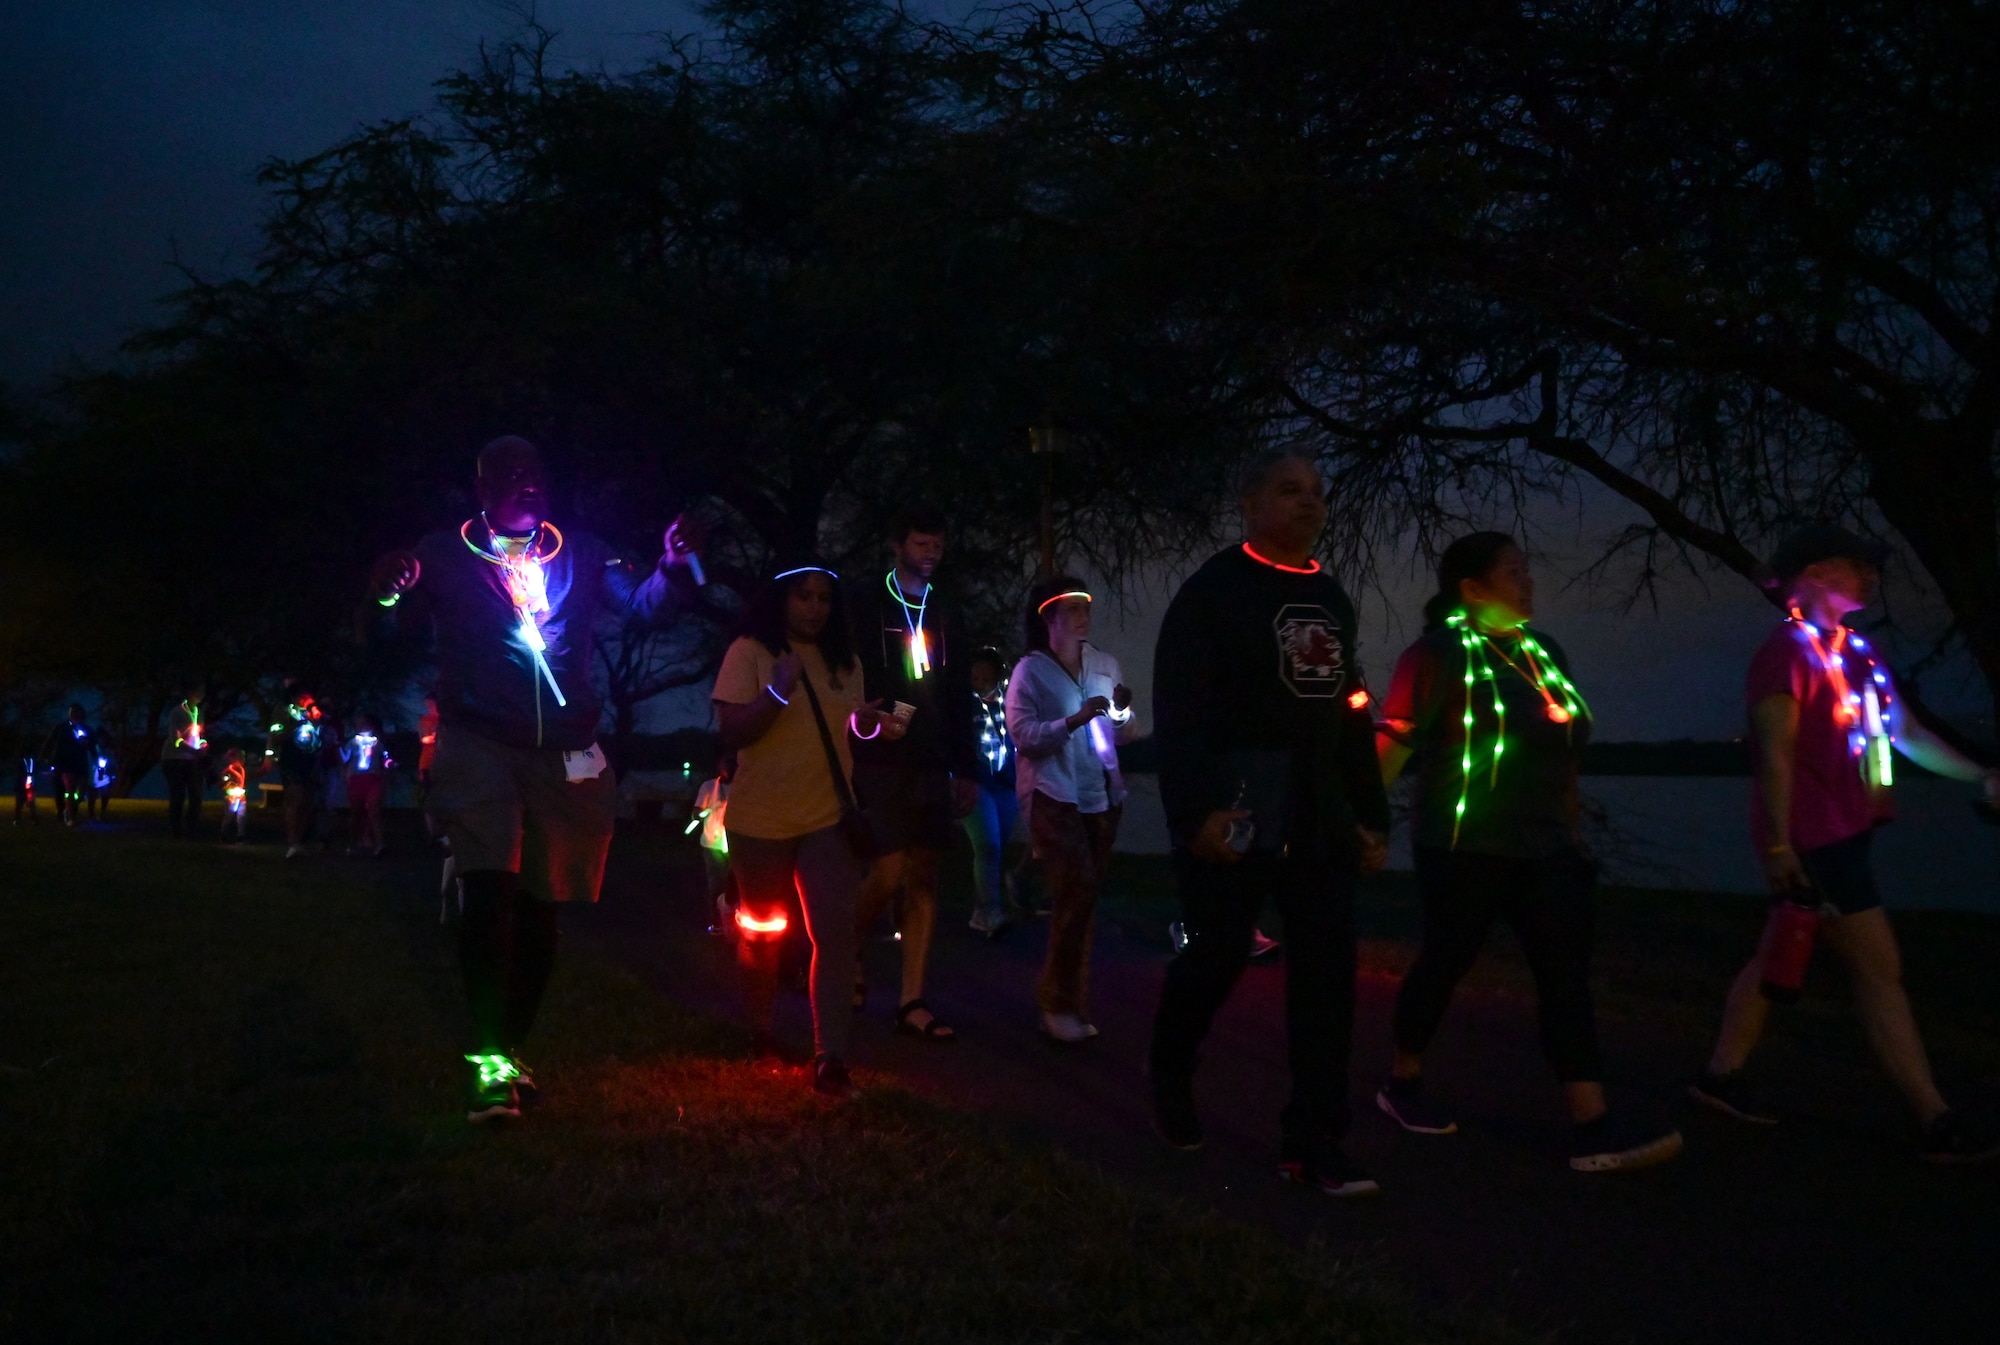 Runners race on the Missing Man Trail during a Sexual Assault Awareness Prevention Month glow run on Joint Base Pearl Harbor-Hickam, Hawaii, Mar. 31, 2023. The run was held to increase awareness of sexual assault within the military and provide helpful resources. (U.S. Air Force photo by Staff Sgt. Alan Ricker)